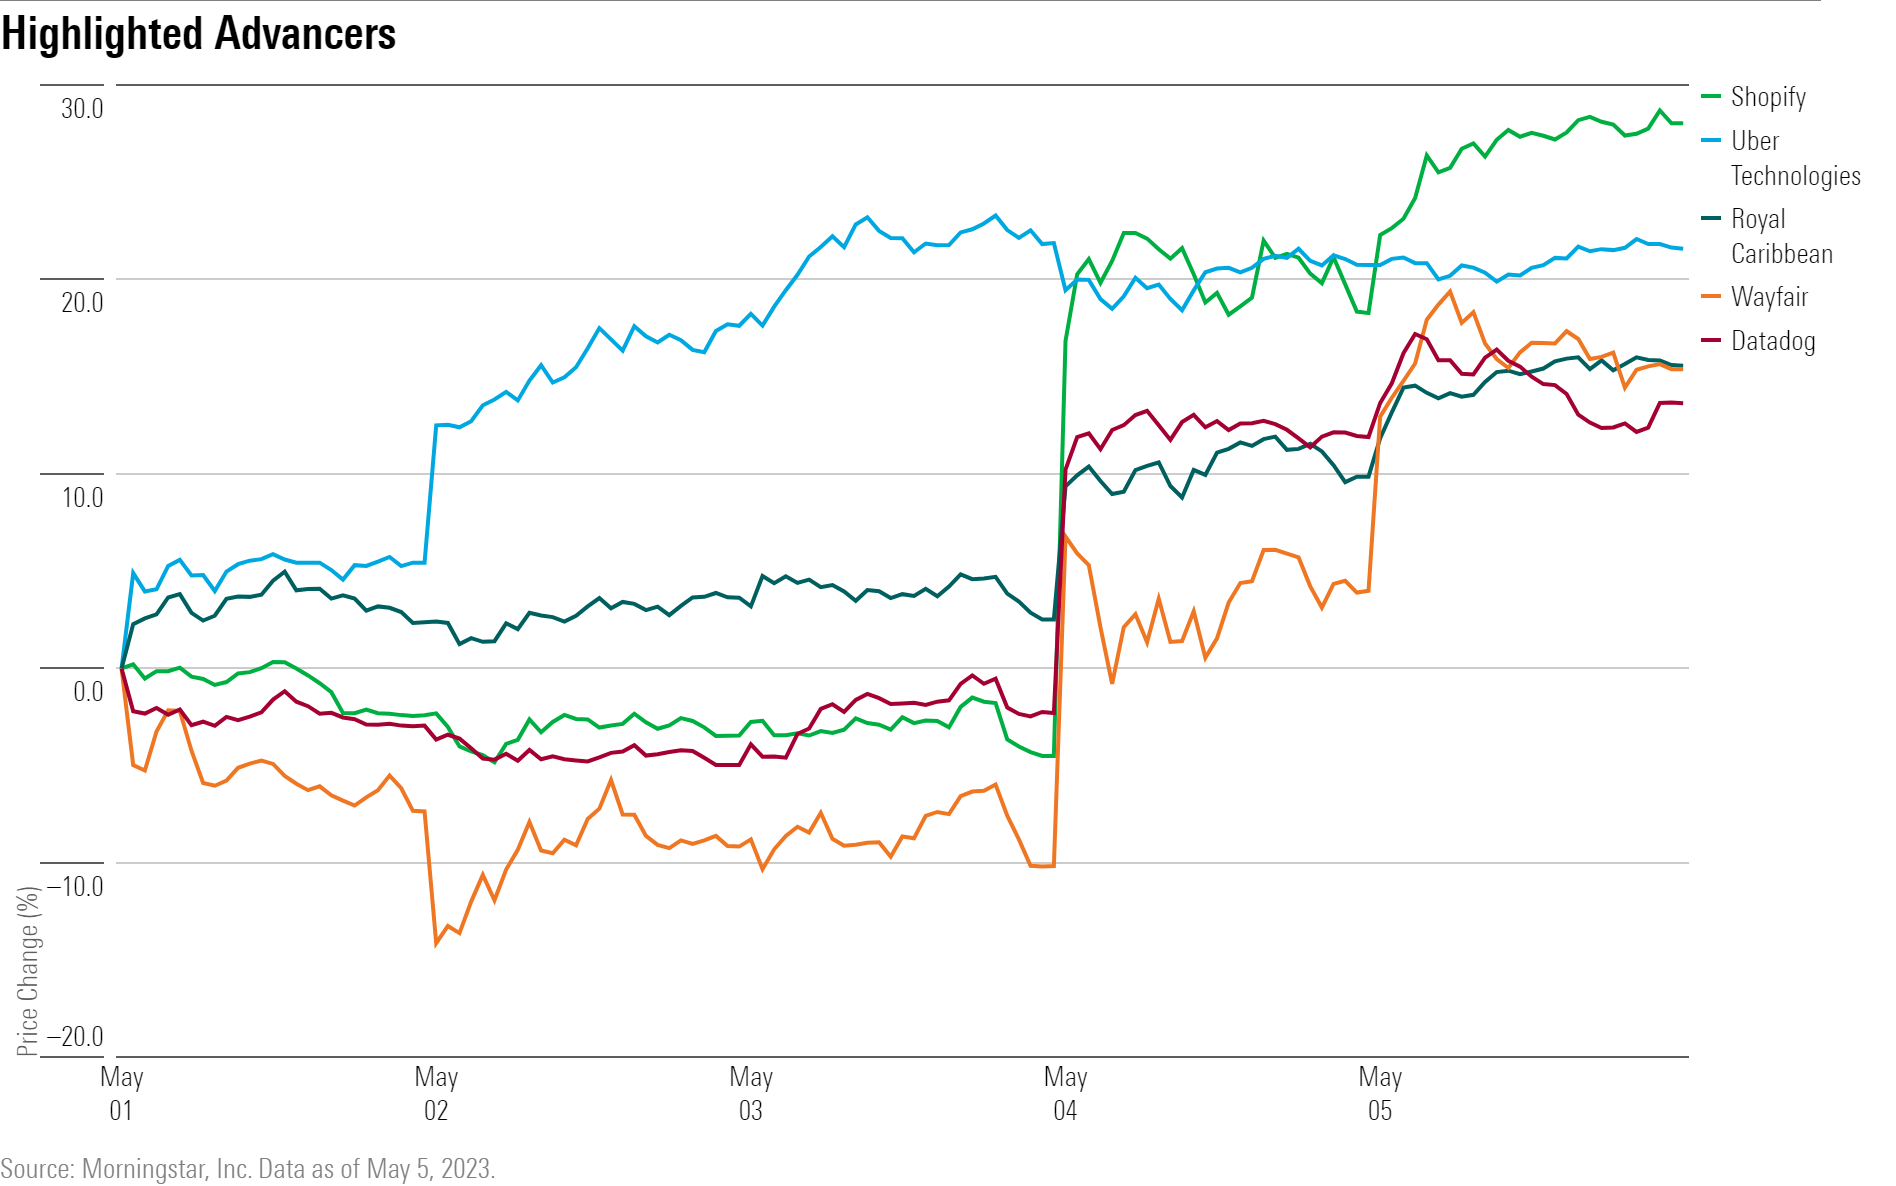 A line chart showing the performance of $SHOP, $UBER, $DDOG, $W, and $RCL stock.